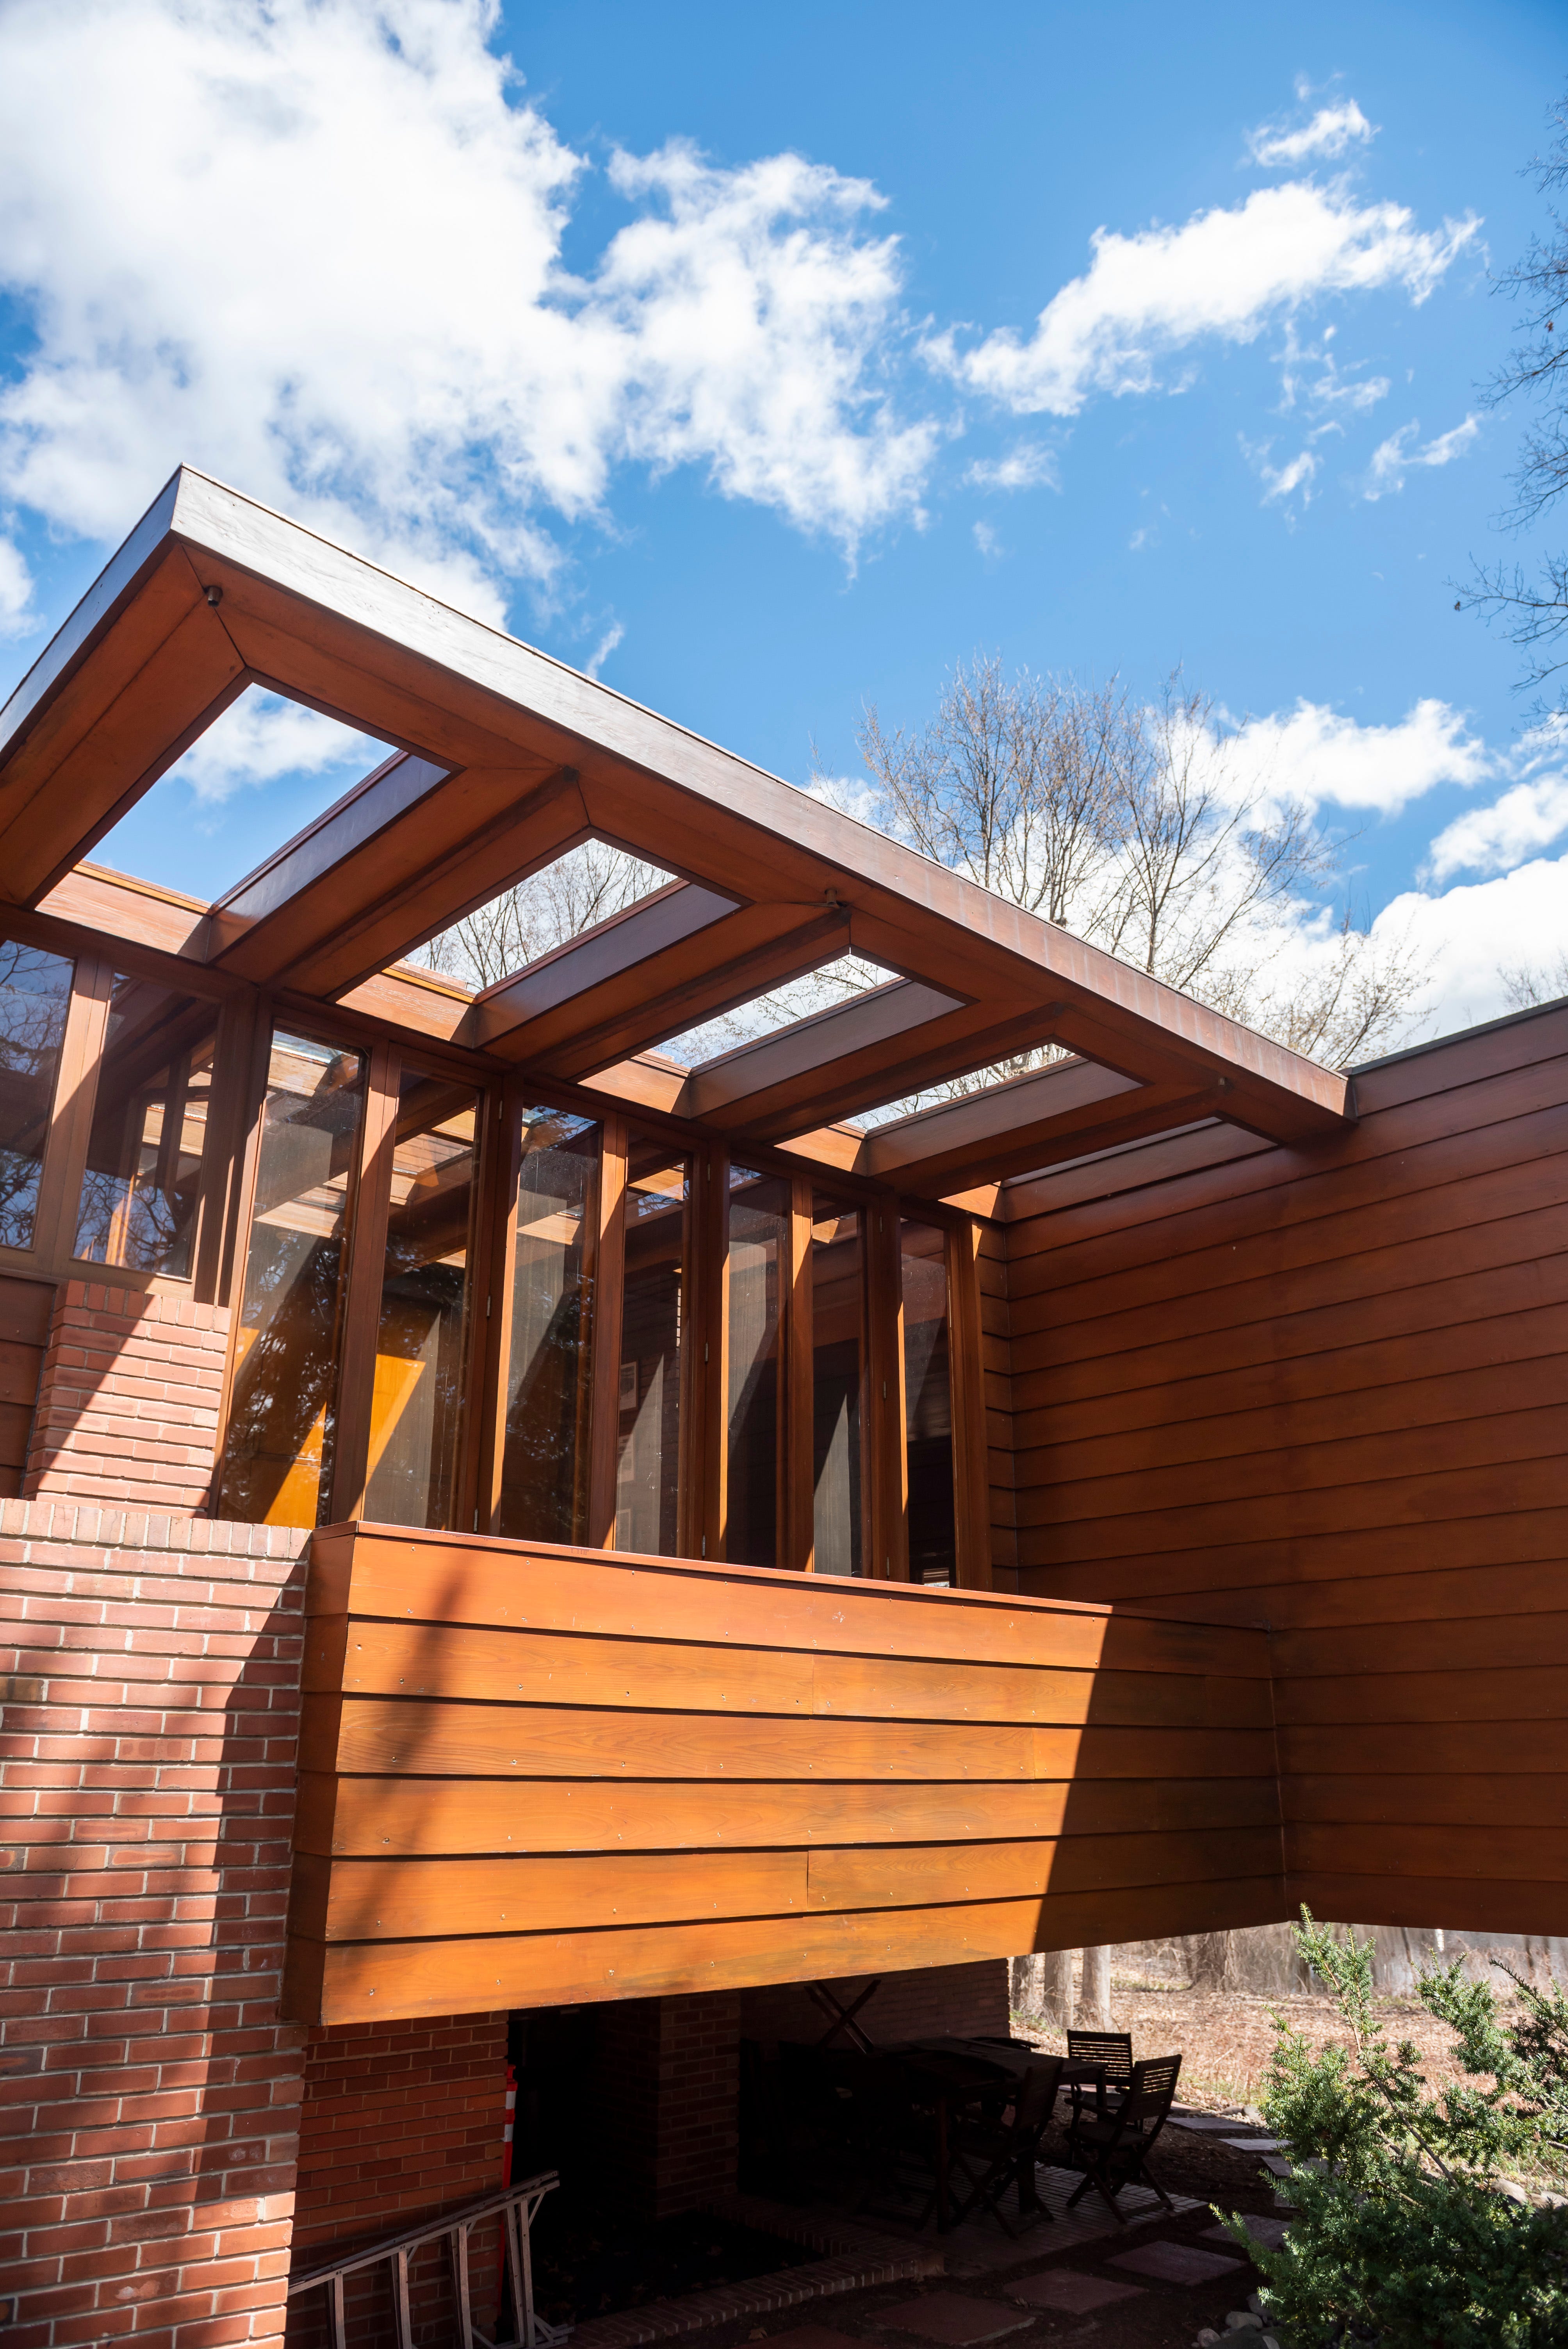 Constructed of brick and cypress, with no garage, the Affleck house is an example of what Frank Lloyd Wright called a Usonian home.